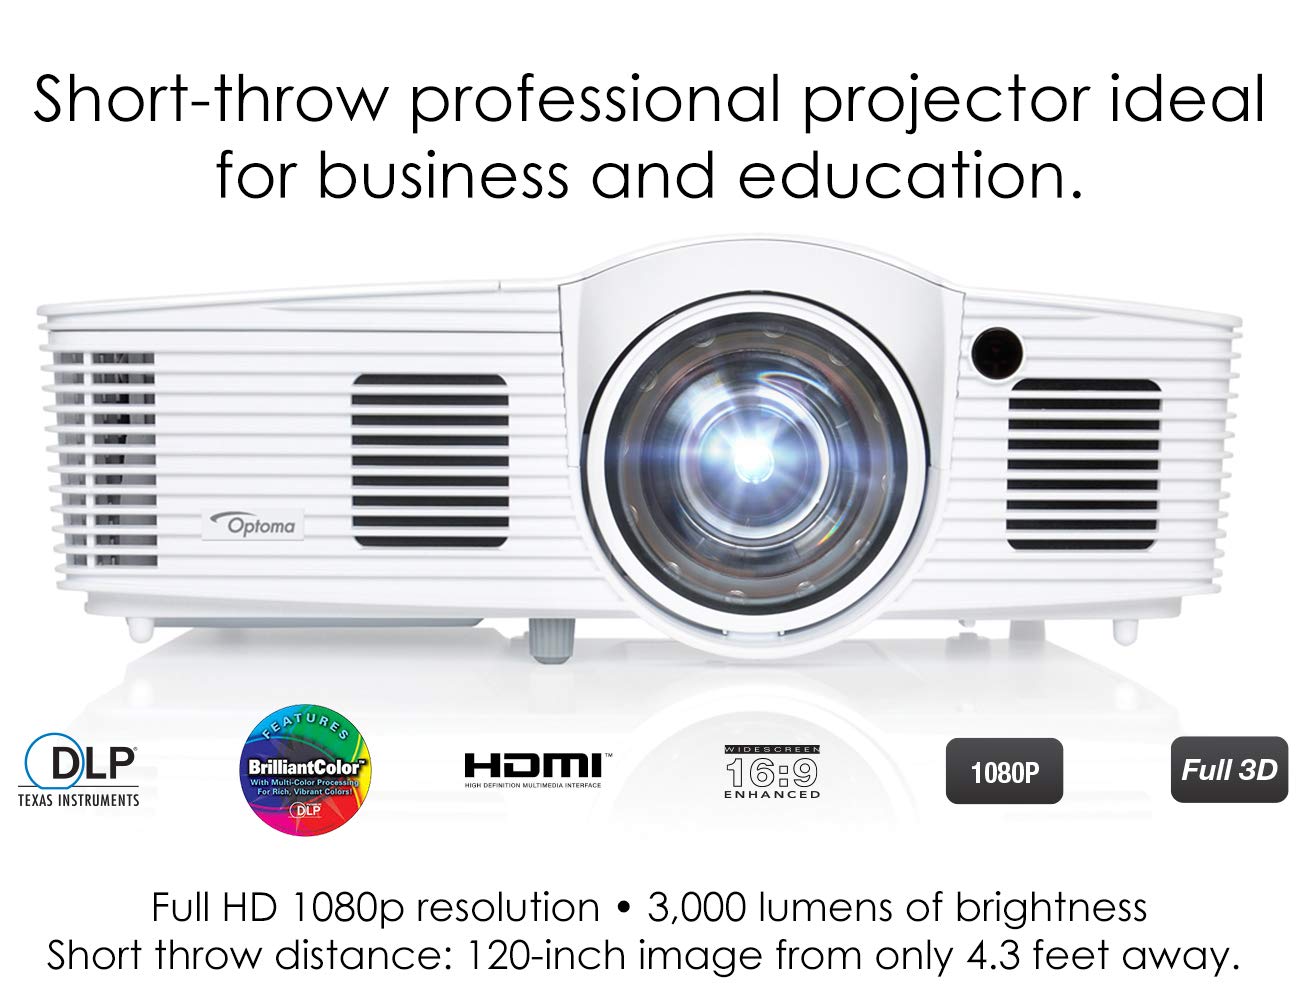 Optoma EH200ST Full 3D 1080p 3000 Lumen DLP Short Throw Projector with 20,000:1 Contrast Ratio and MHL Enabled HDMI Port , white